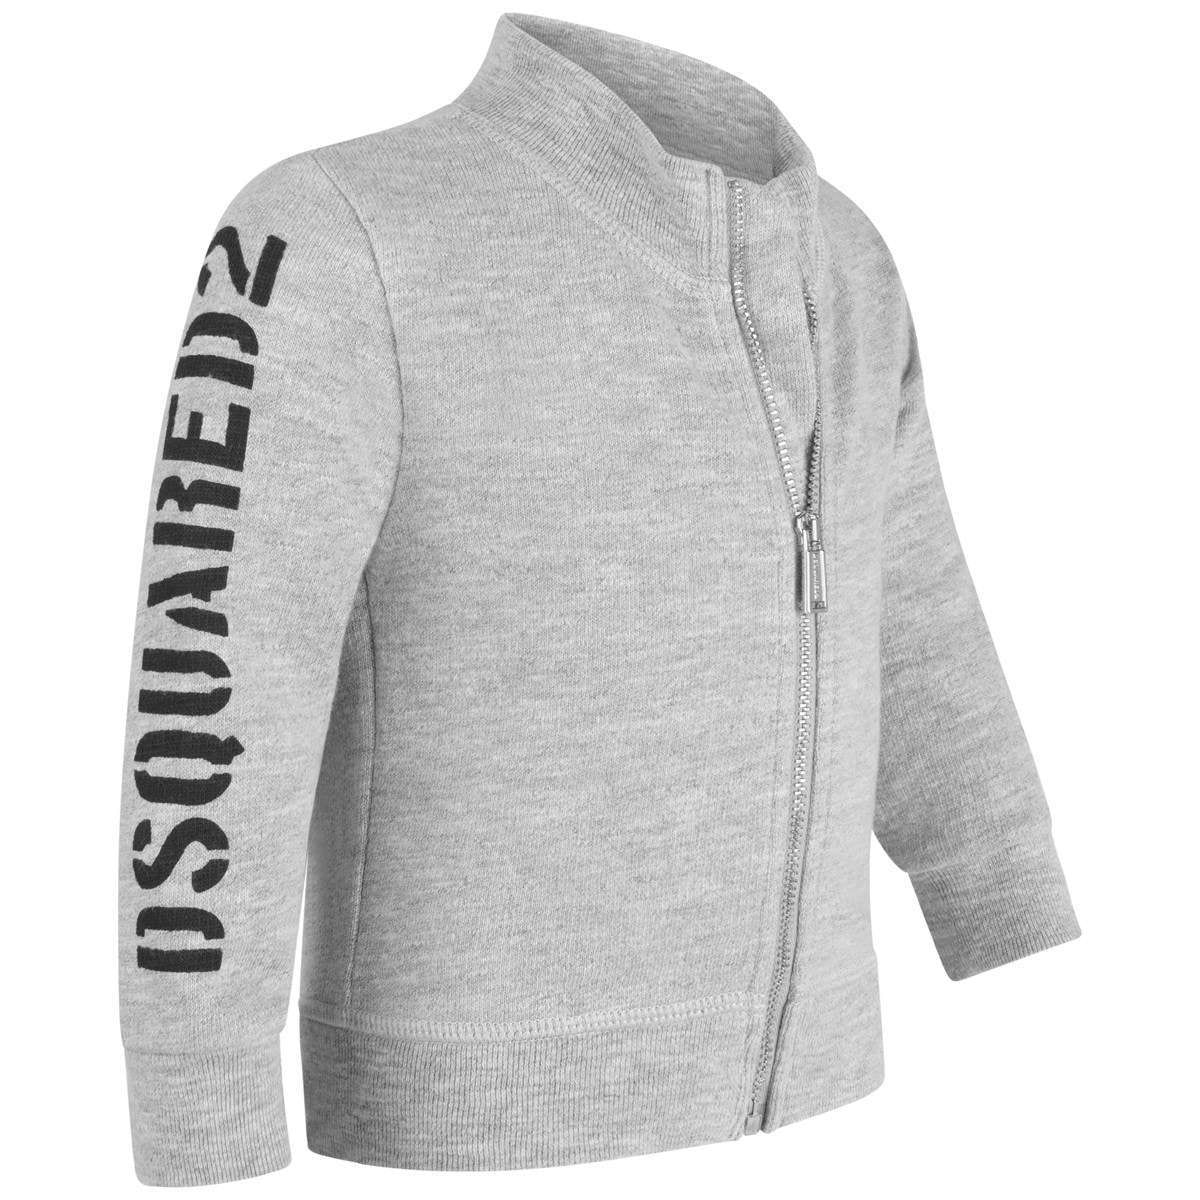 Zip up top by Dsquared2 with a stand up collar, ribbed cuffs and hemline and the logo print on the sleeves to finish.